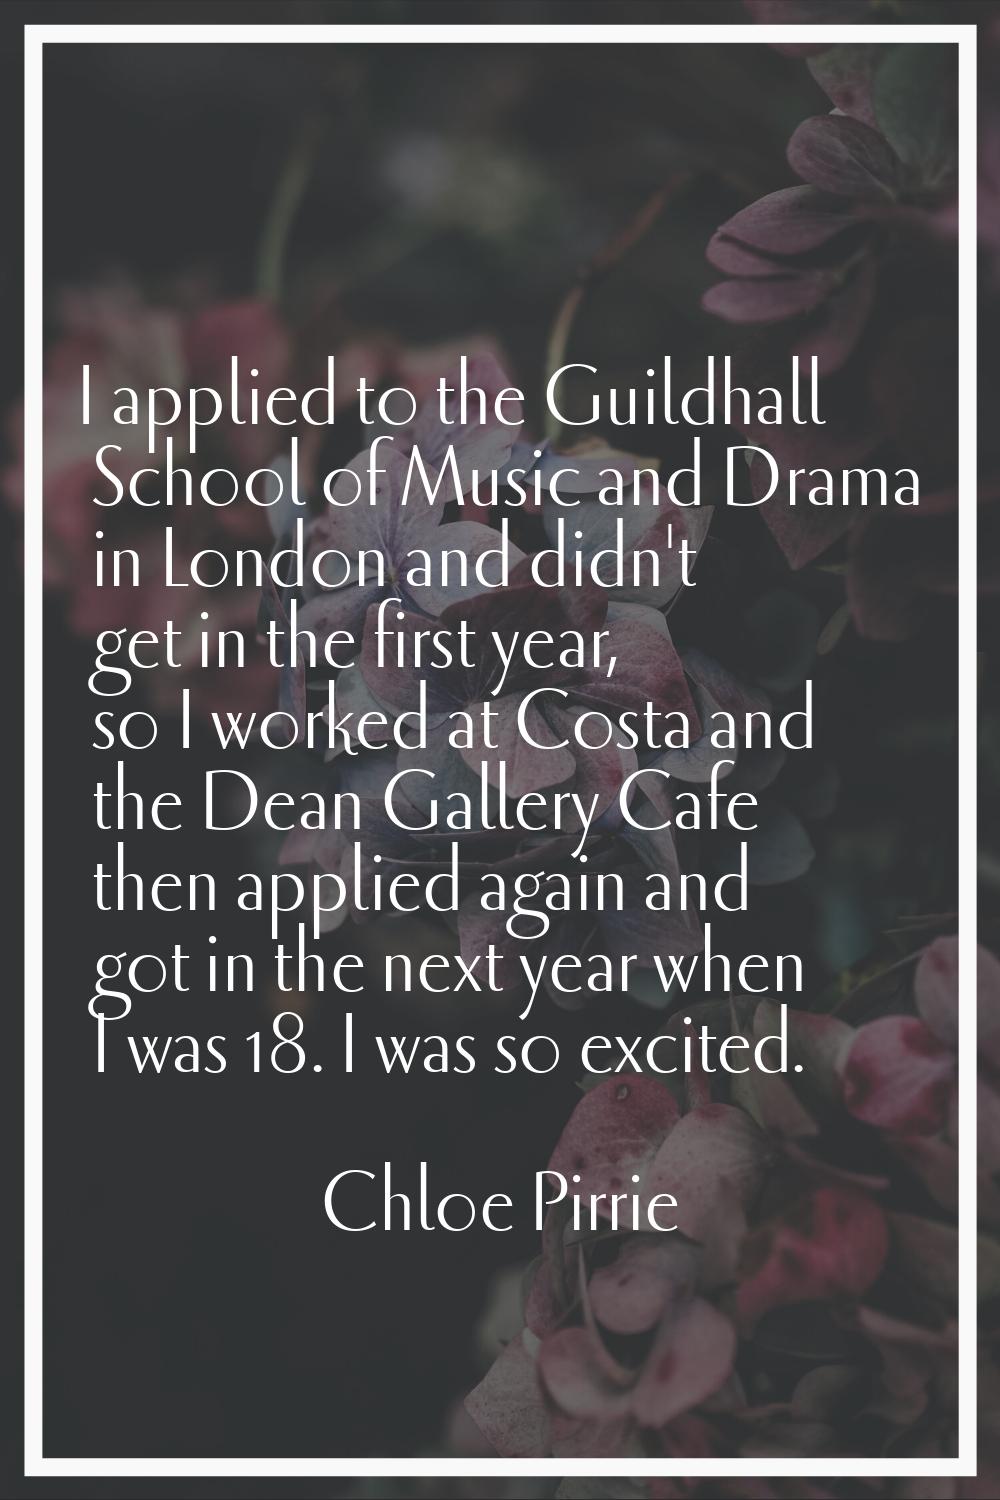 I applied to the Guildhall School of Music and Drama in London and didn't get in the first year, so